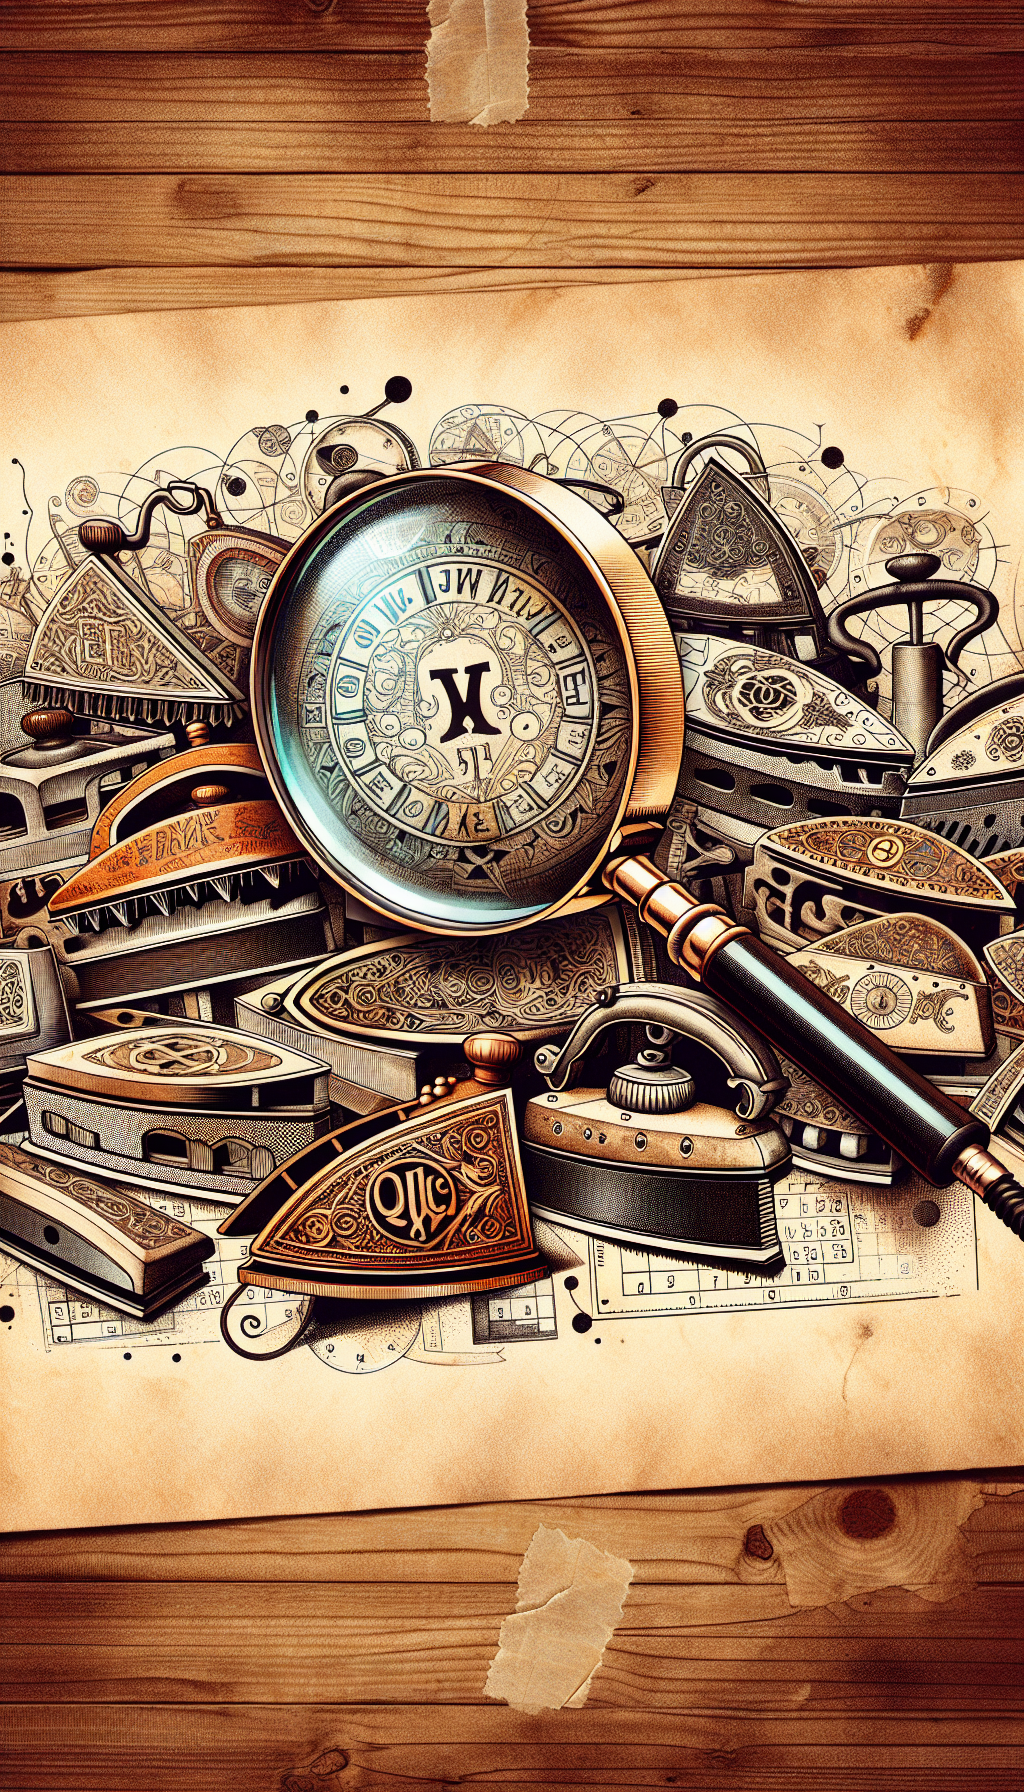 An intricate collage featuring a magnifying glass that reveals an array of faded manufacturers' stamps and elegant signatures on antique sad irons. Each iron has a unique, stylized stamp that hints at its historical origin, against a backdrop of swirling clock hands and calendar pages, symbolizing the passage of time. The illustration merges sketched, watercolor, and sepia-toned photographic styles.